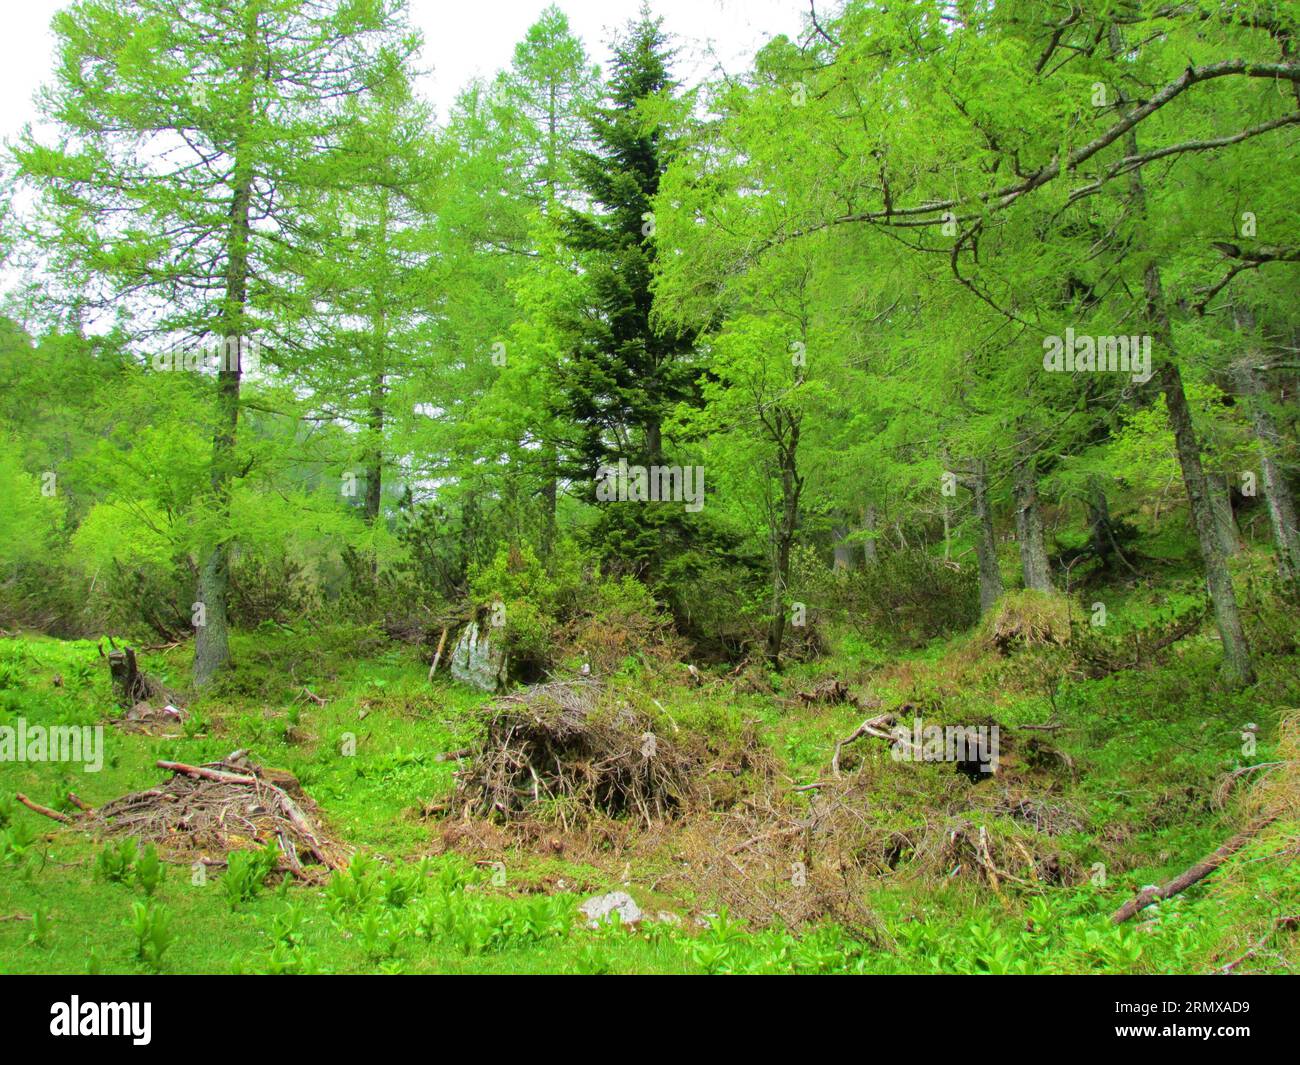 Mountain larch (Larix decidua) and spruce (Picea abies) forest with creeping pine (Pinus mugo) bushes growing in the midst and spring vegetation cover Stock Photo